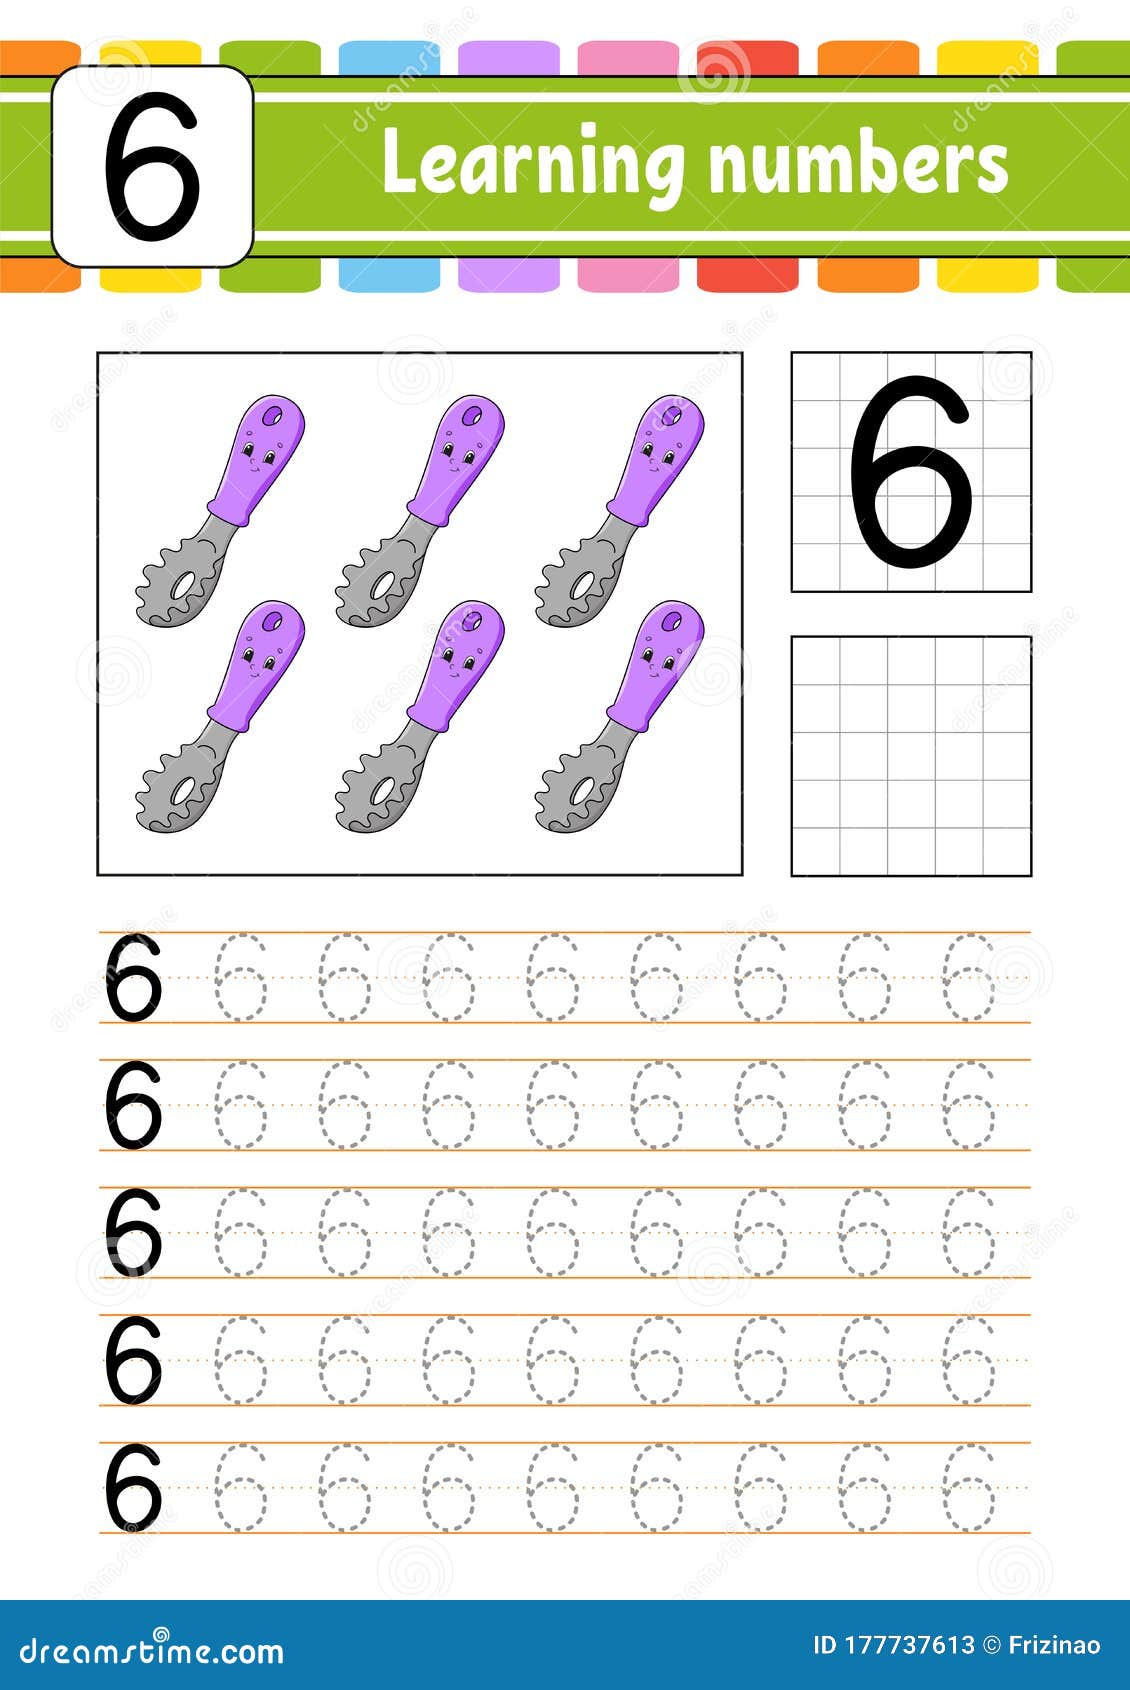 number-6-trace-and-write-handwriting-practice-learning-numbers-for-kids-education-developing